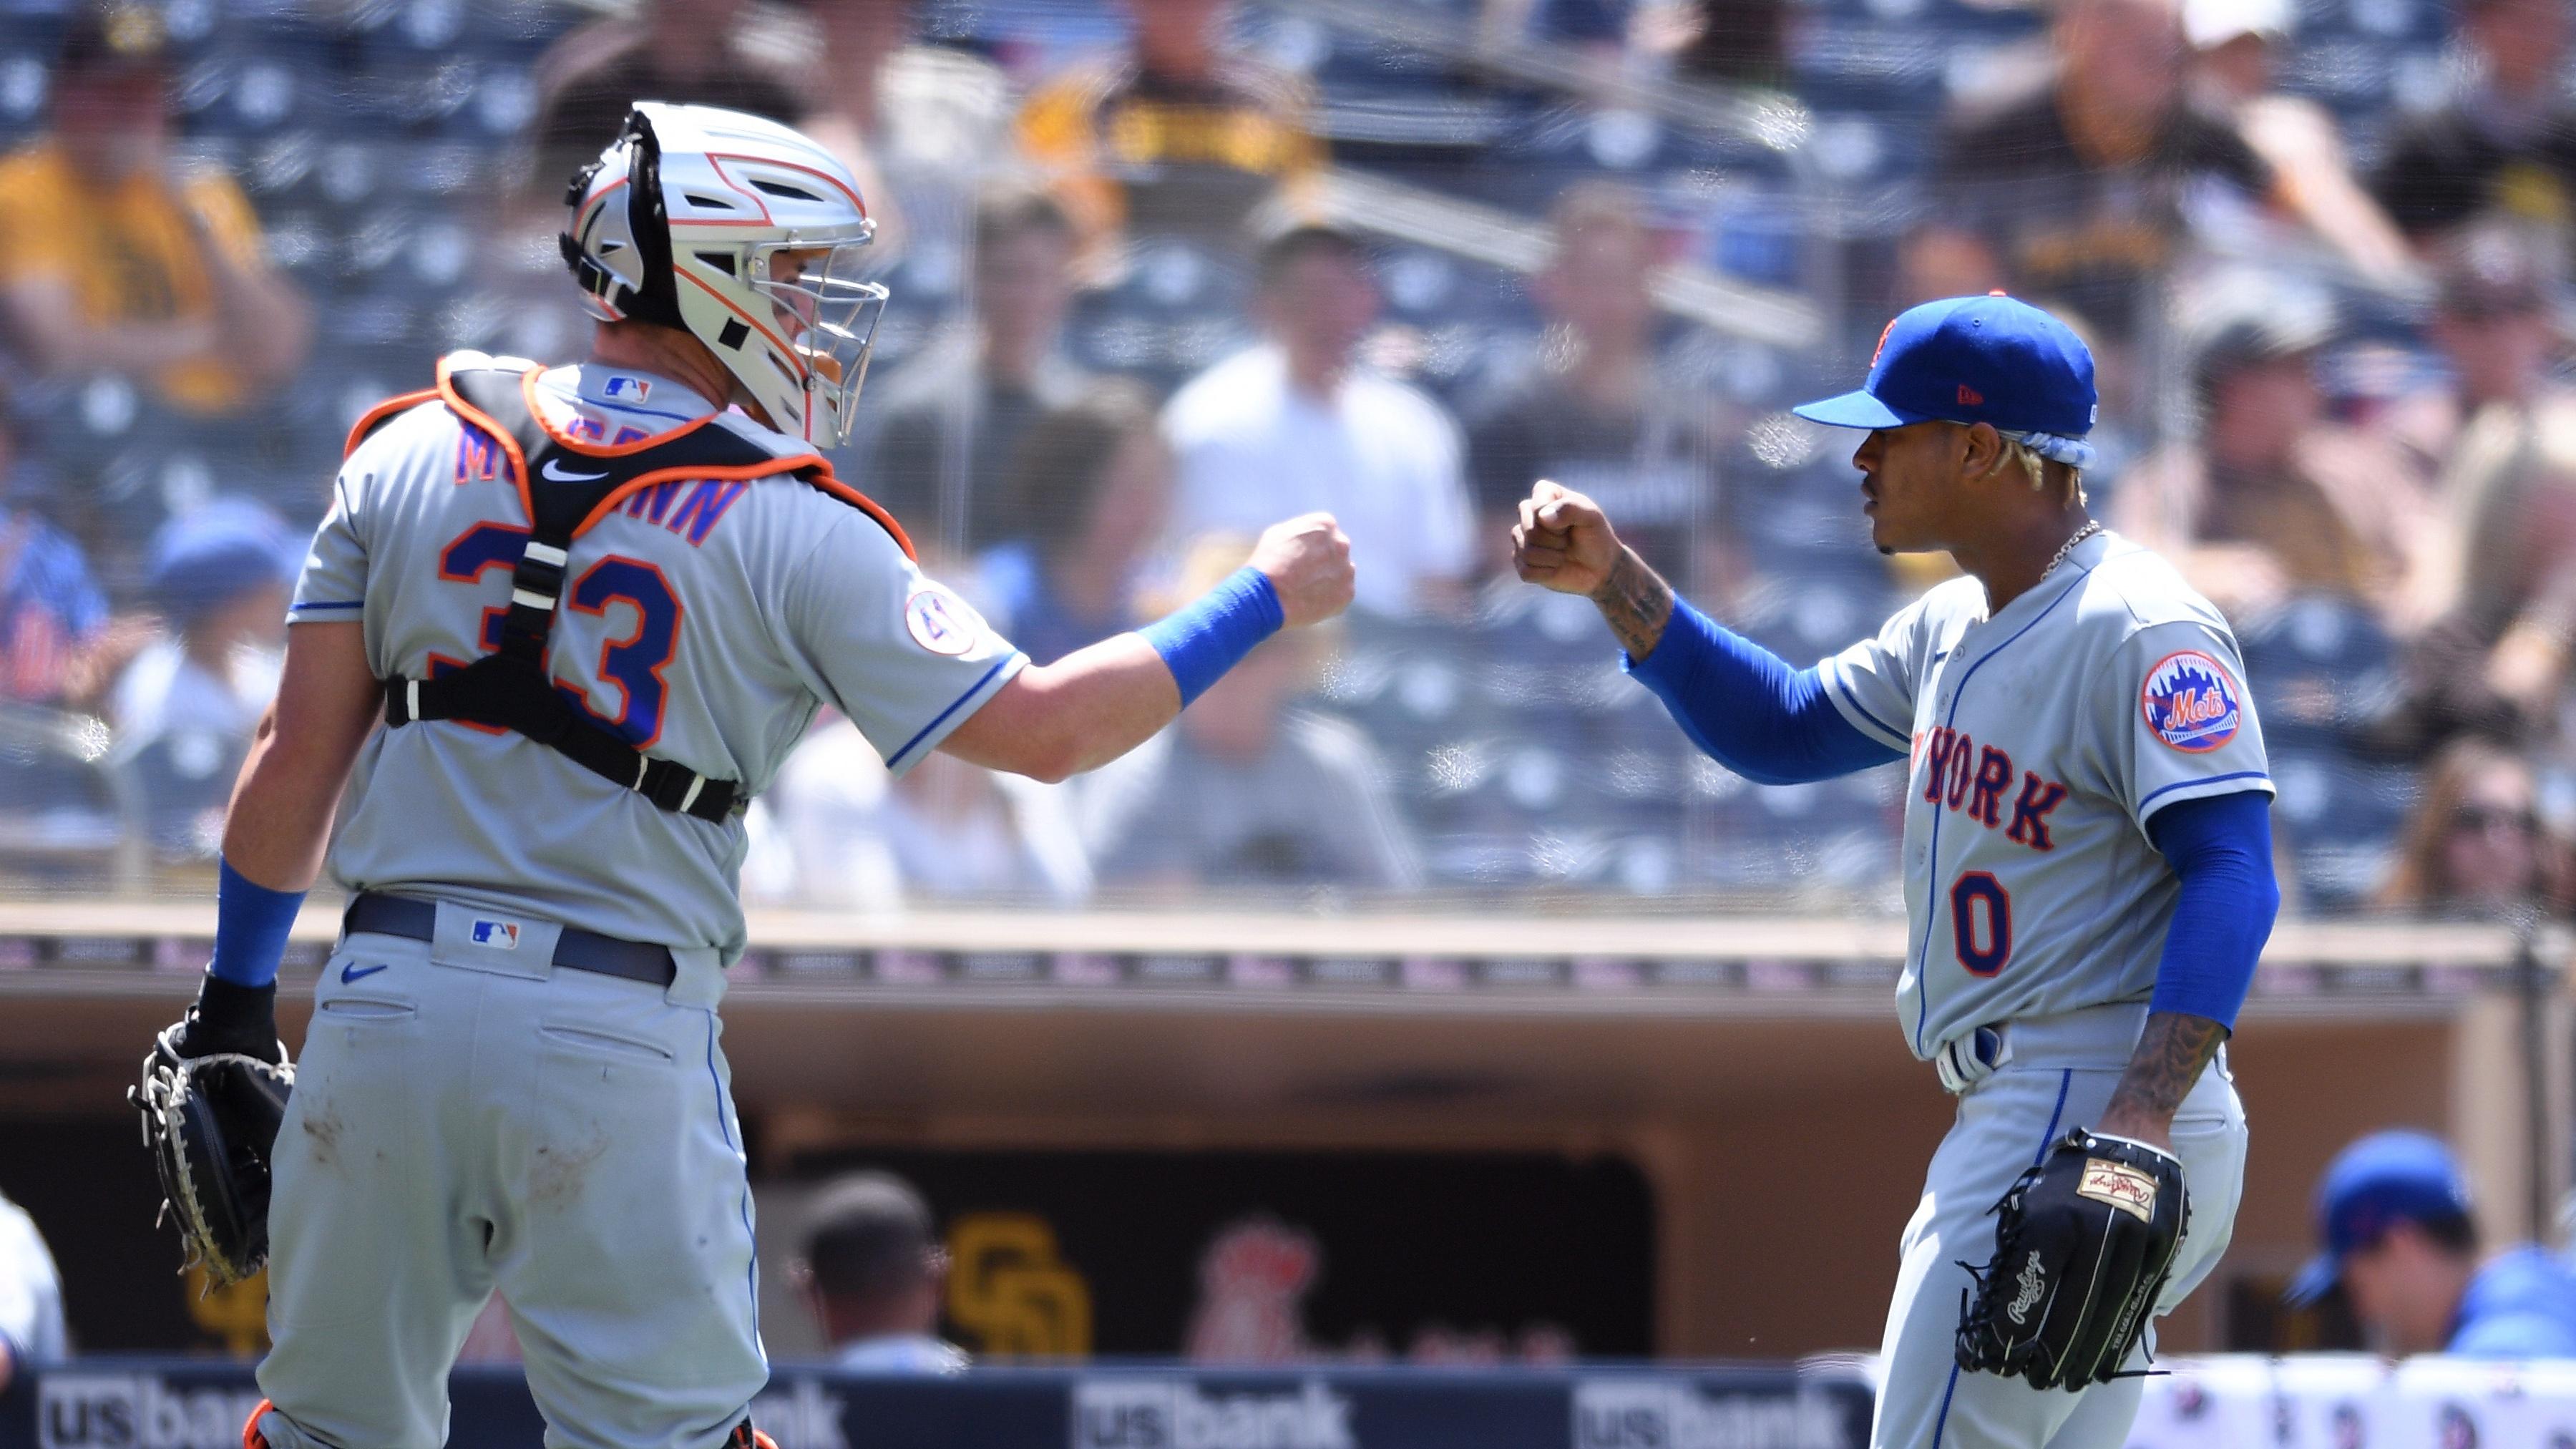 Jun 6, 2021; San Diego, California, USA; New York Mets starting pitcher Marcus Stroman (0) and catcher James McCann (33) celebrate after a double play to end the fourth inning at Petco Park. Mandatory Credit: Orlando Ramirez-USA TODAY Sports / © Orlando Ramirez-USA TODAY Sports